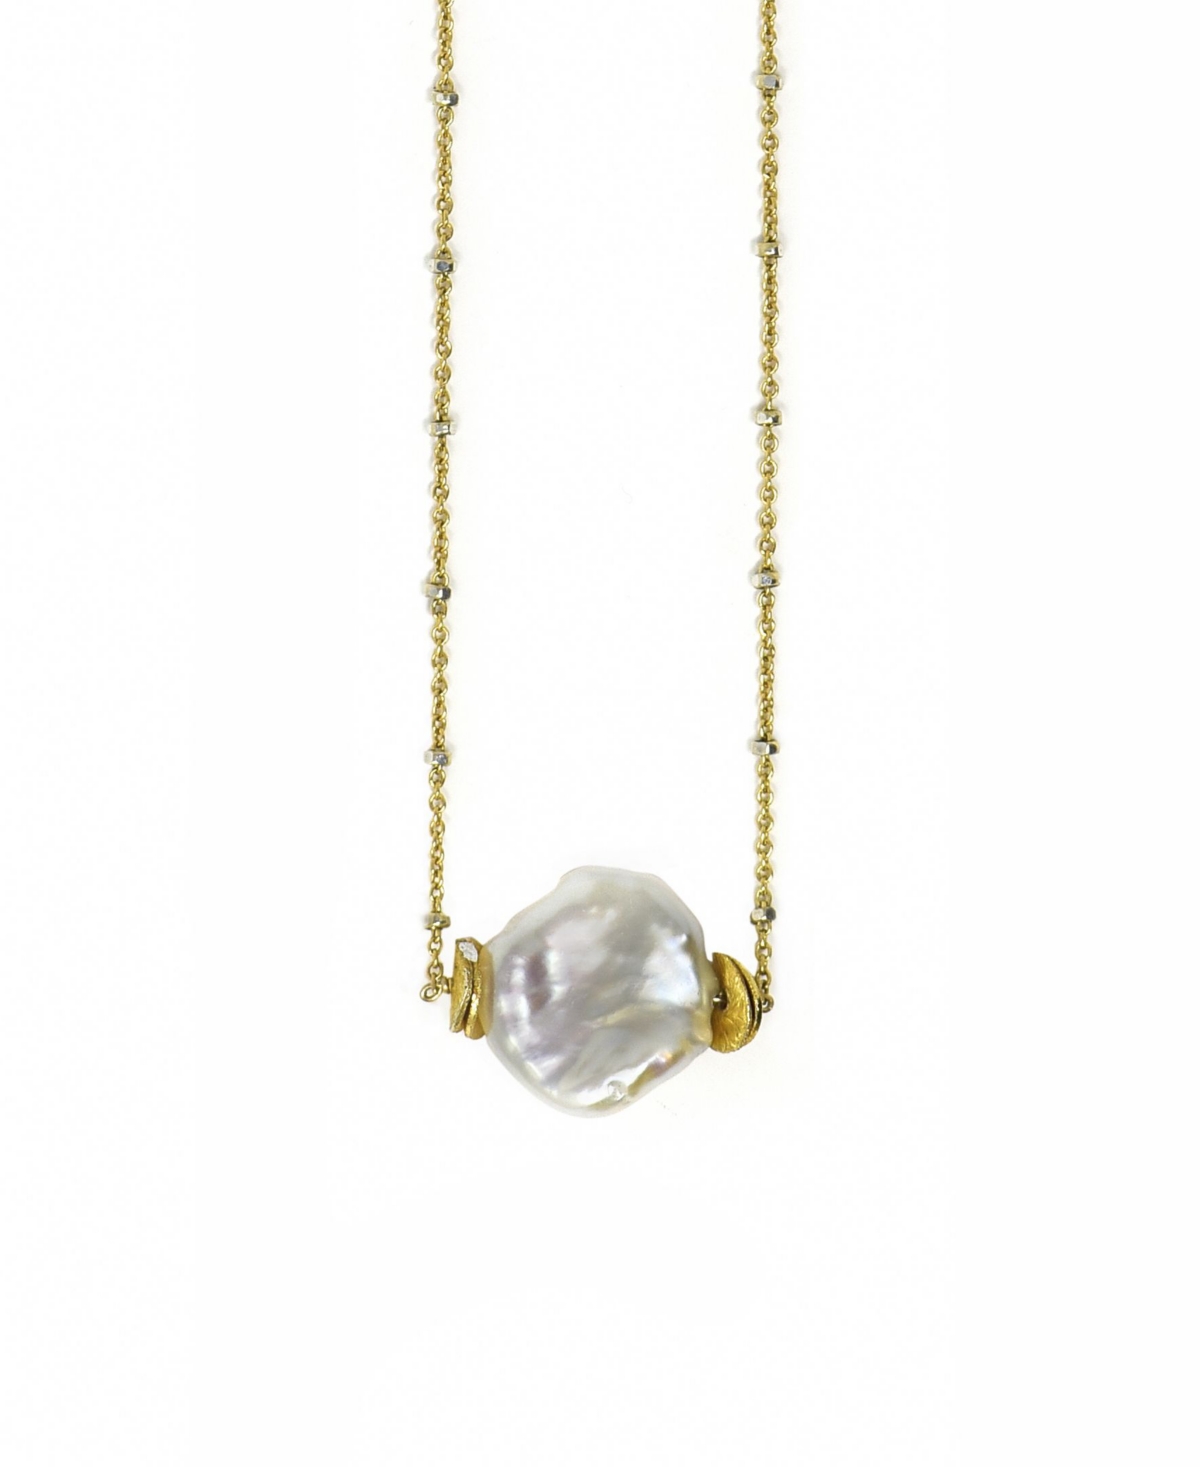 14k Gold Filled Delicate Diamond Cut Chain with a Single Natural Keshi Pearl - White